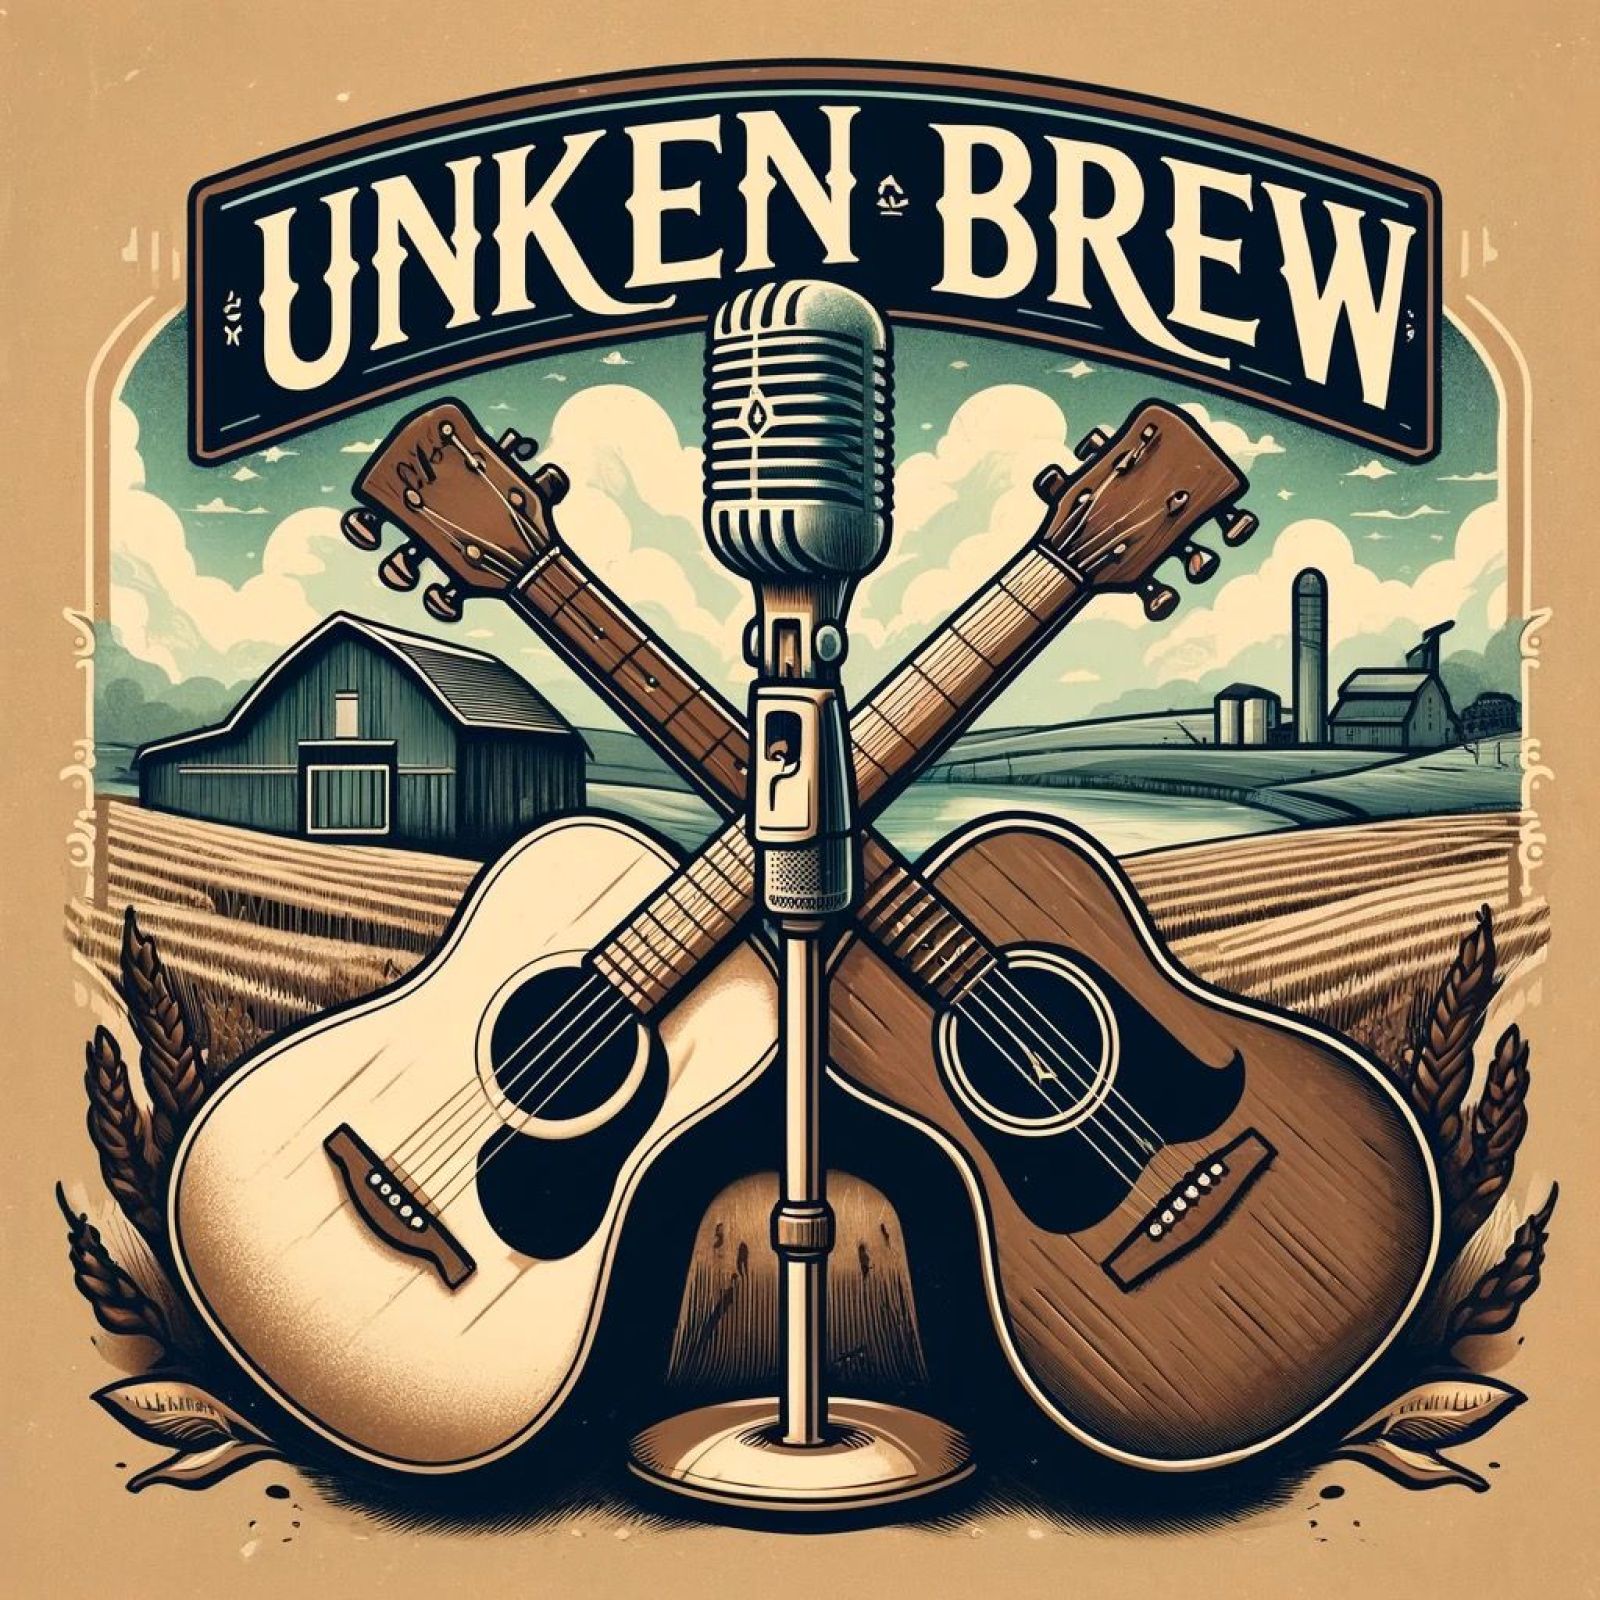 UNKEN BREW, two guitars and a microphone with a farm in the background